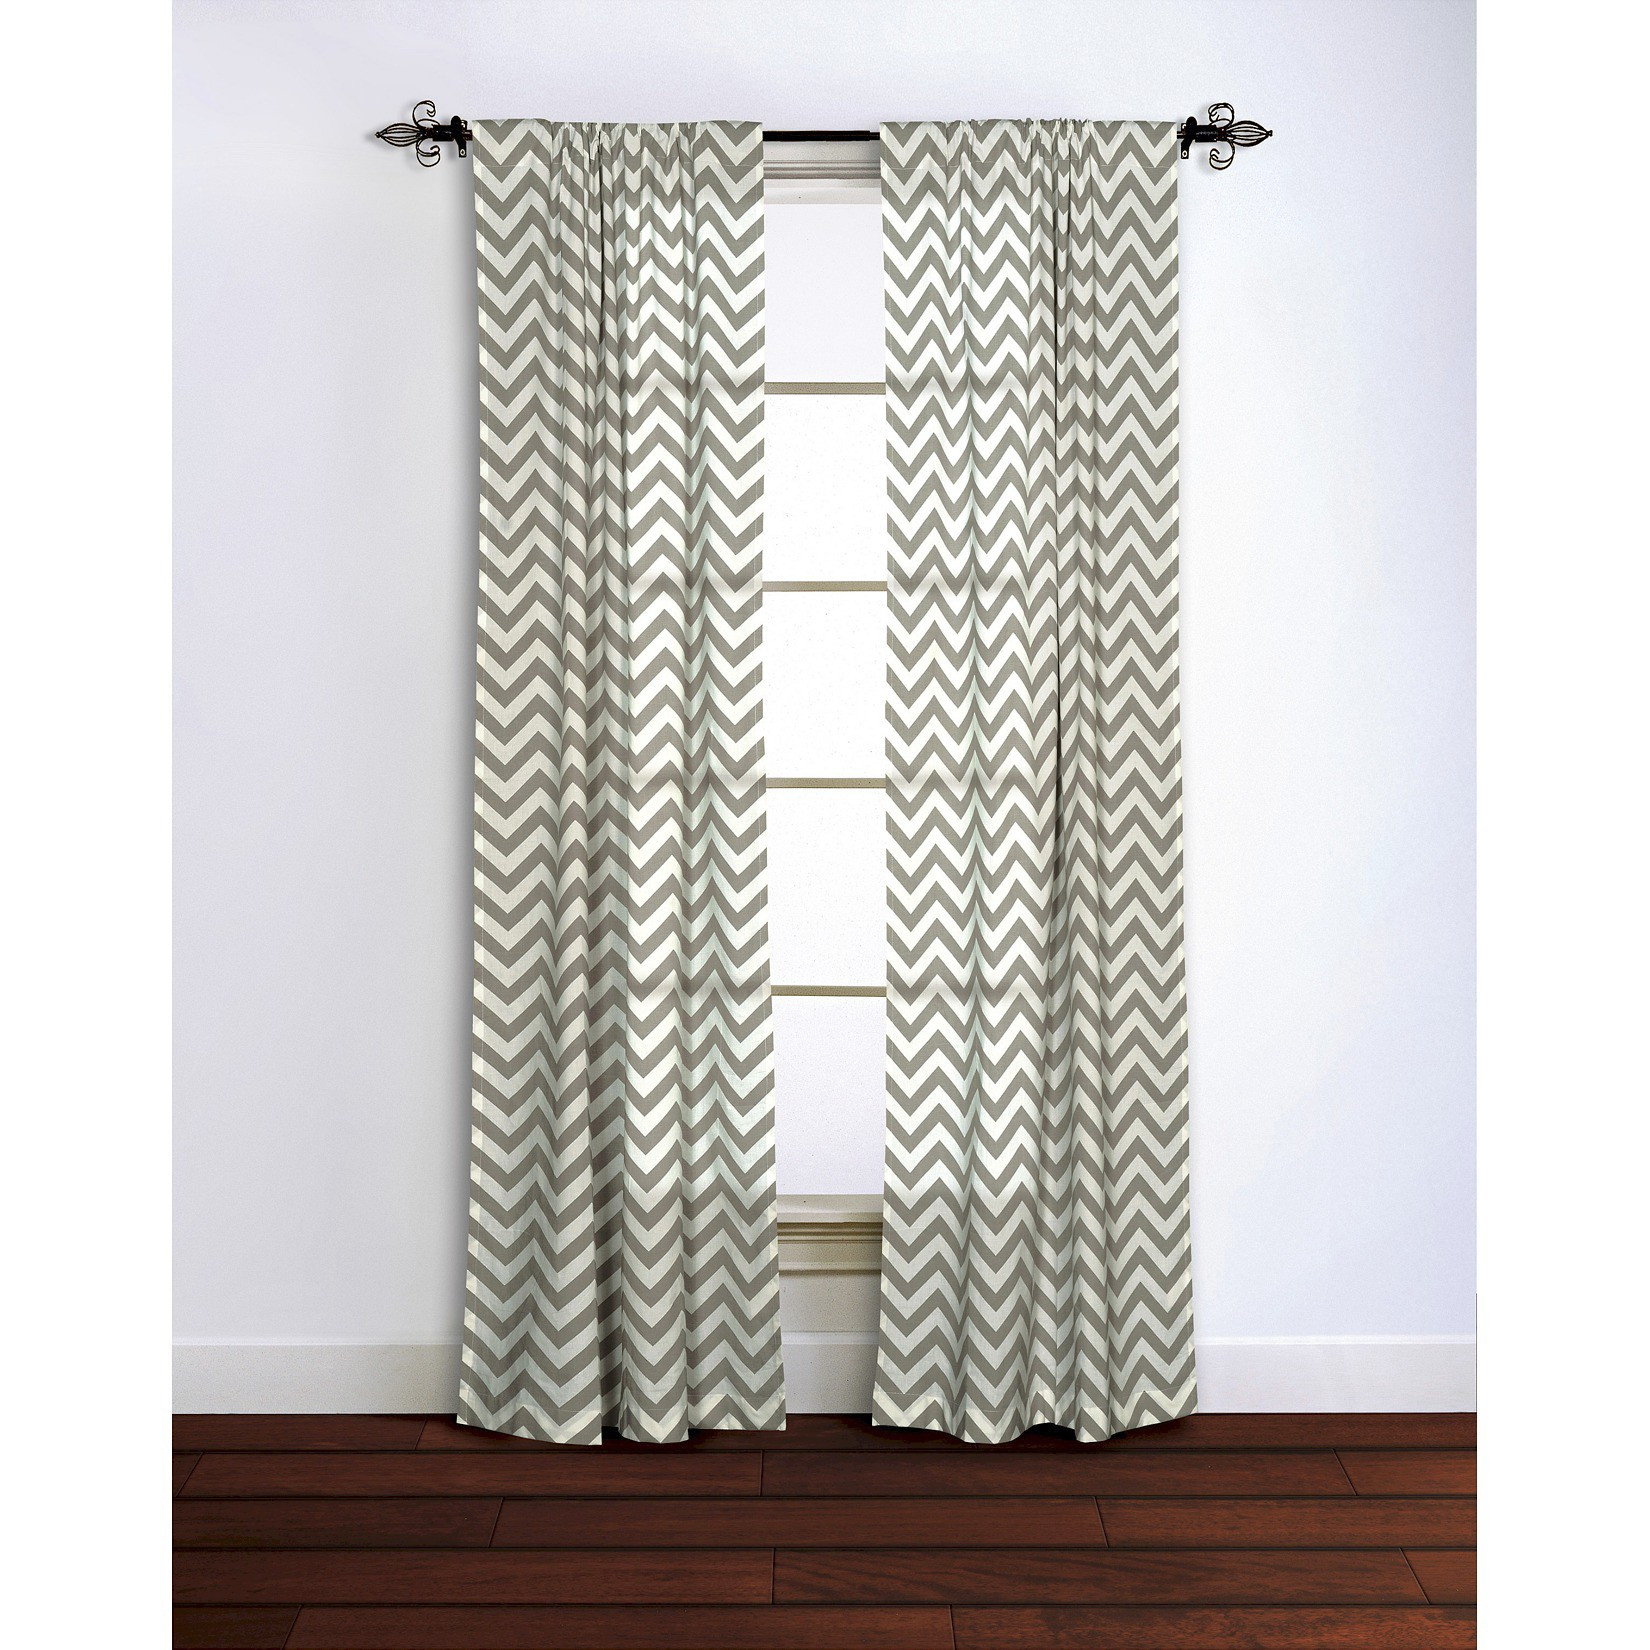 Target Living Room Curtains
 Curtain Buy A Beautiful Curtains At Tar For Window And